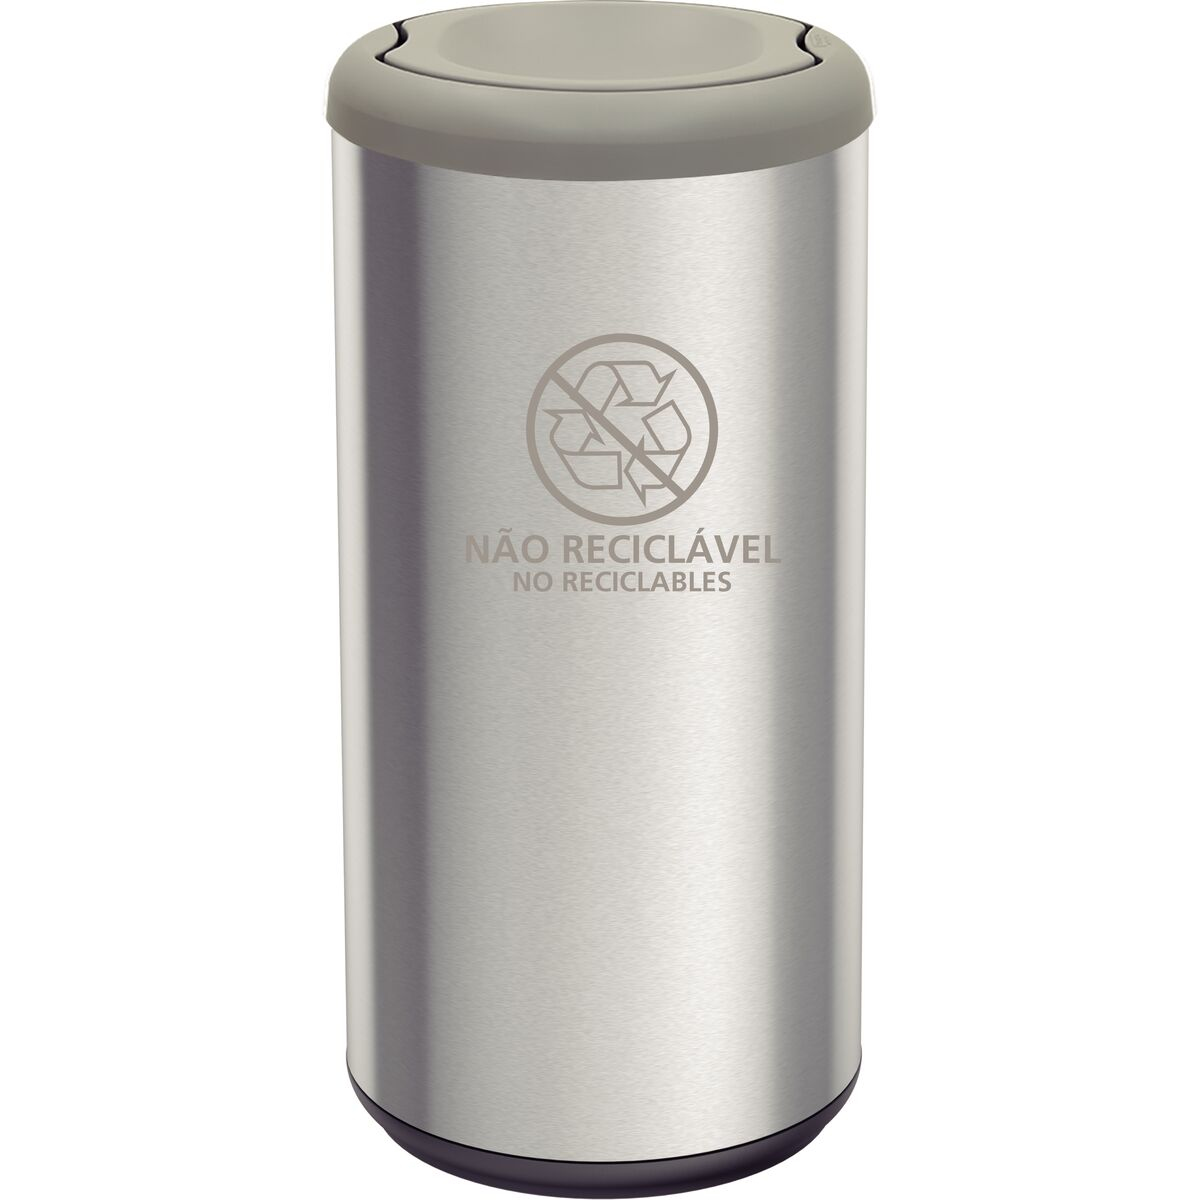 Tramontina 40L stainless steel Piemonte trash bin with a Scotch Brite finish, with swing gray polypropylene lid